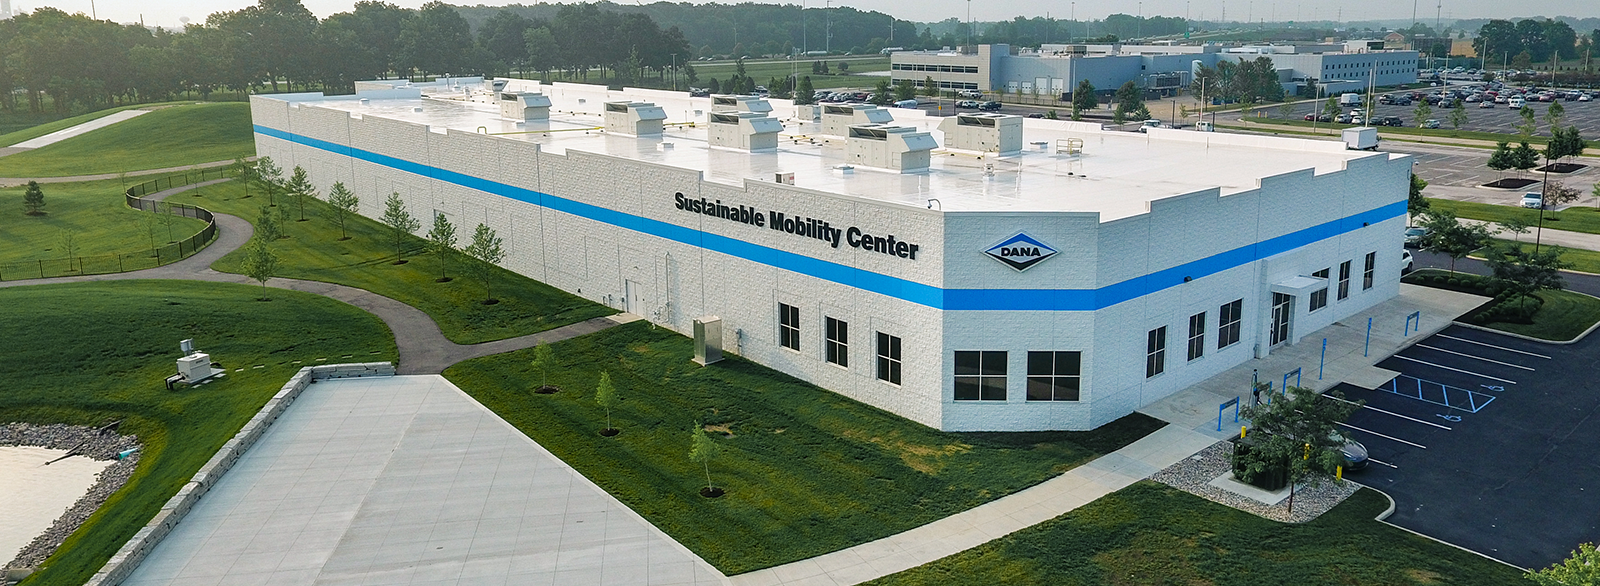 Sustainable Mobility Center